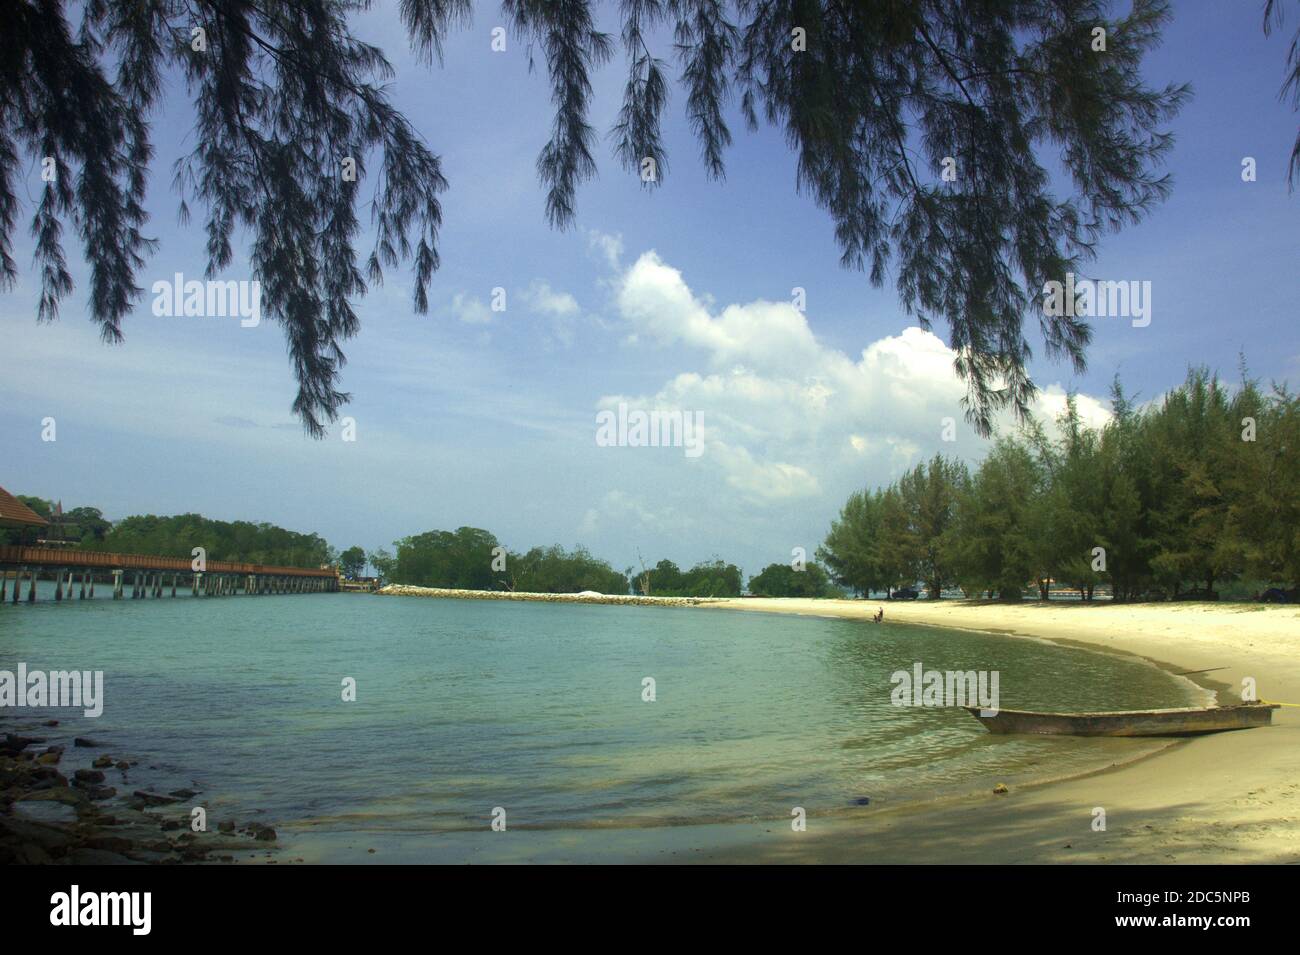 a calm and beautiful lagoon with wooden pedestrian bridge over it in Port Dickson beach Malaysia Stock Photo